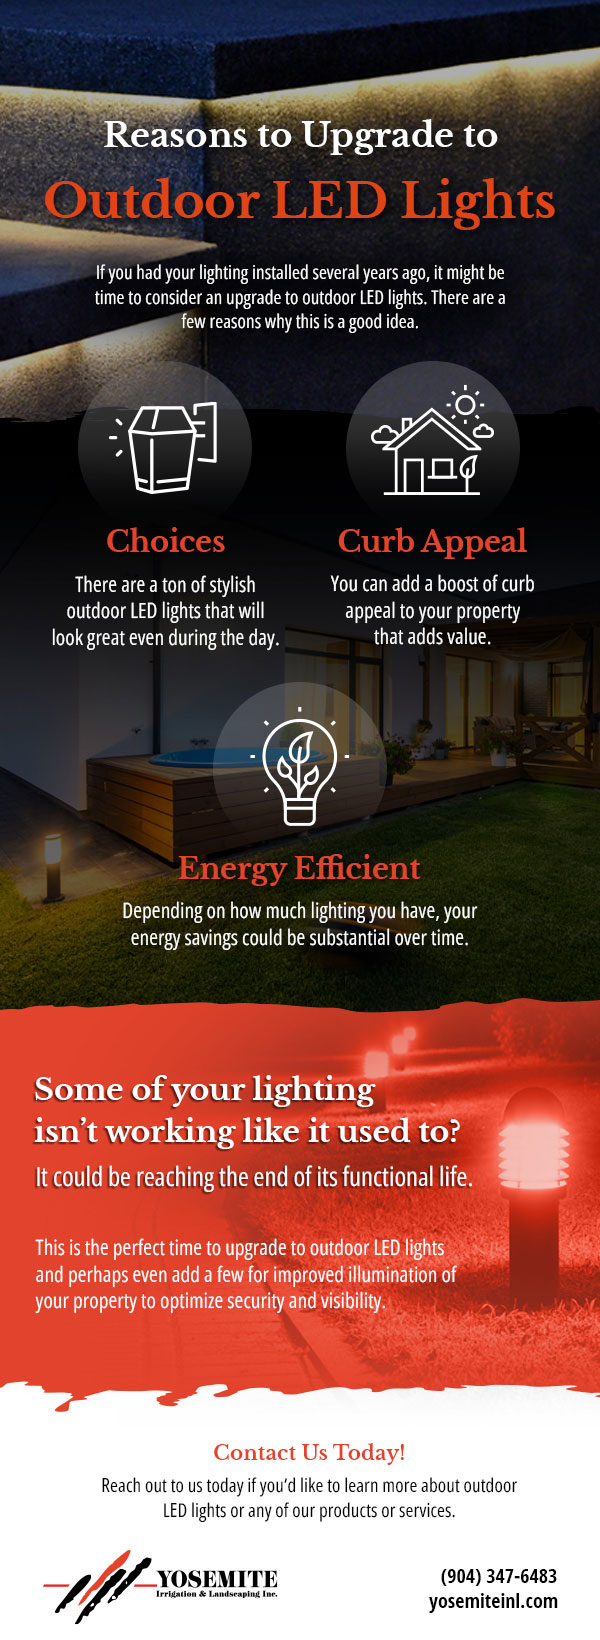 Reasons to Upgrade to Outdoor LED Lights